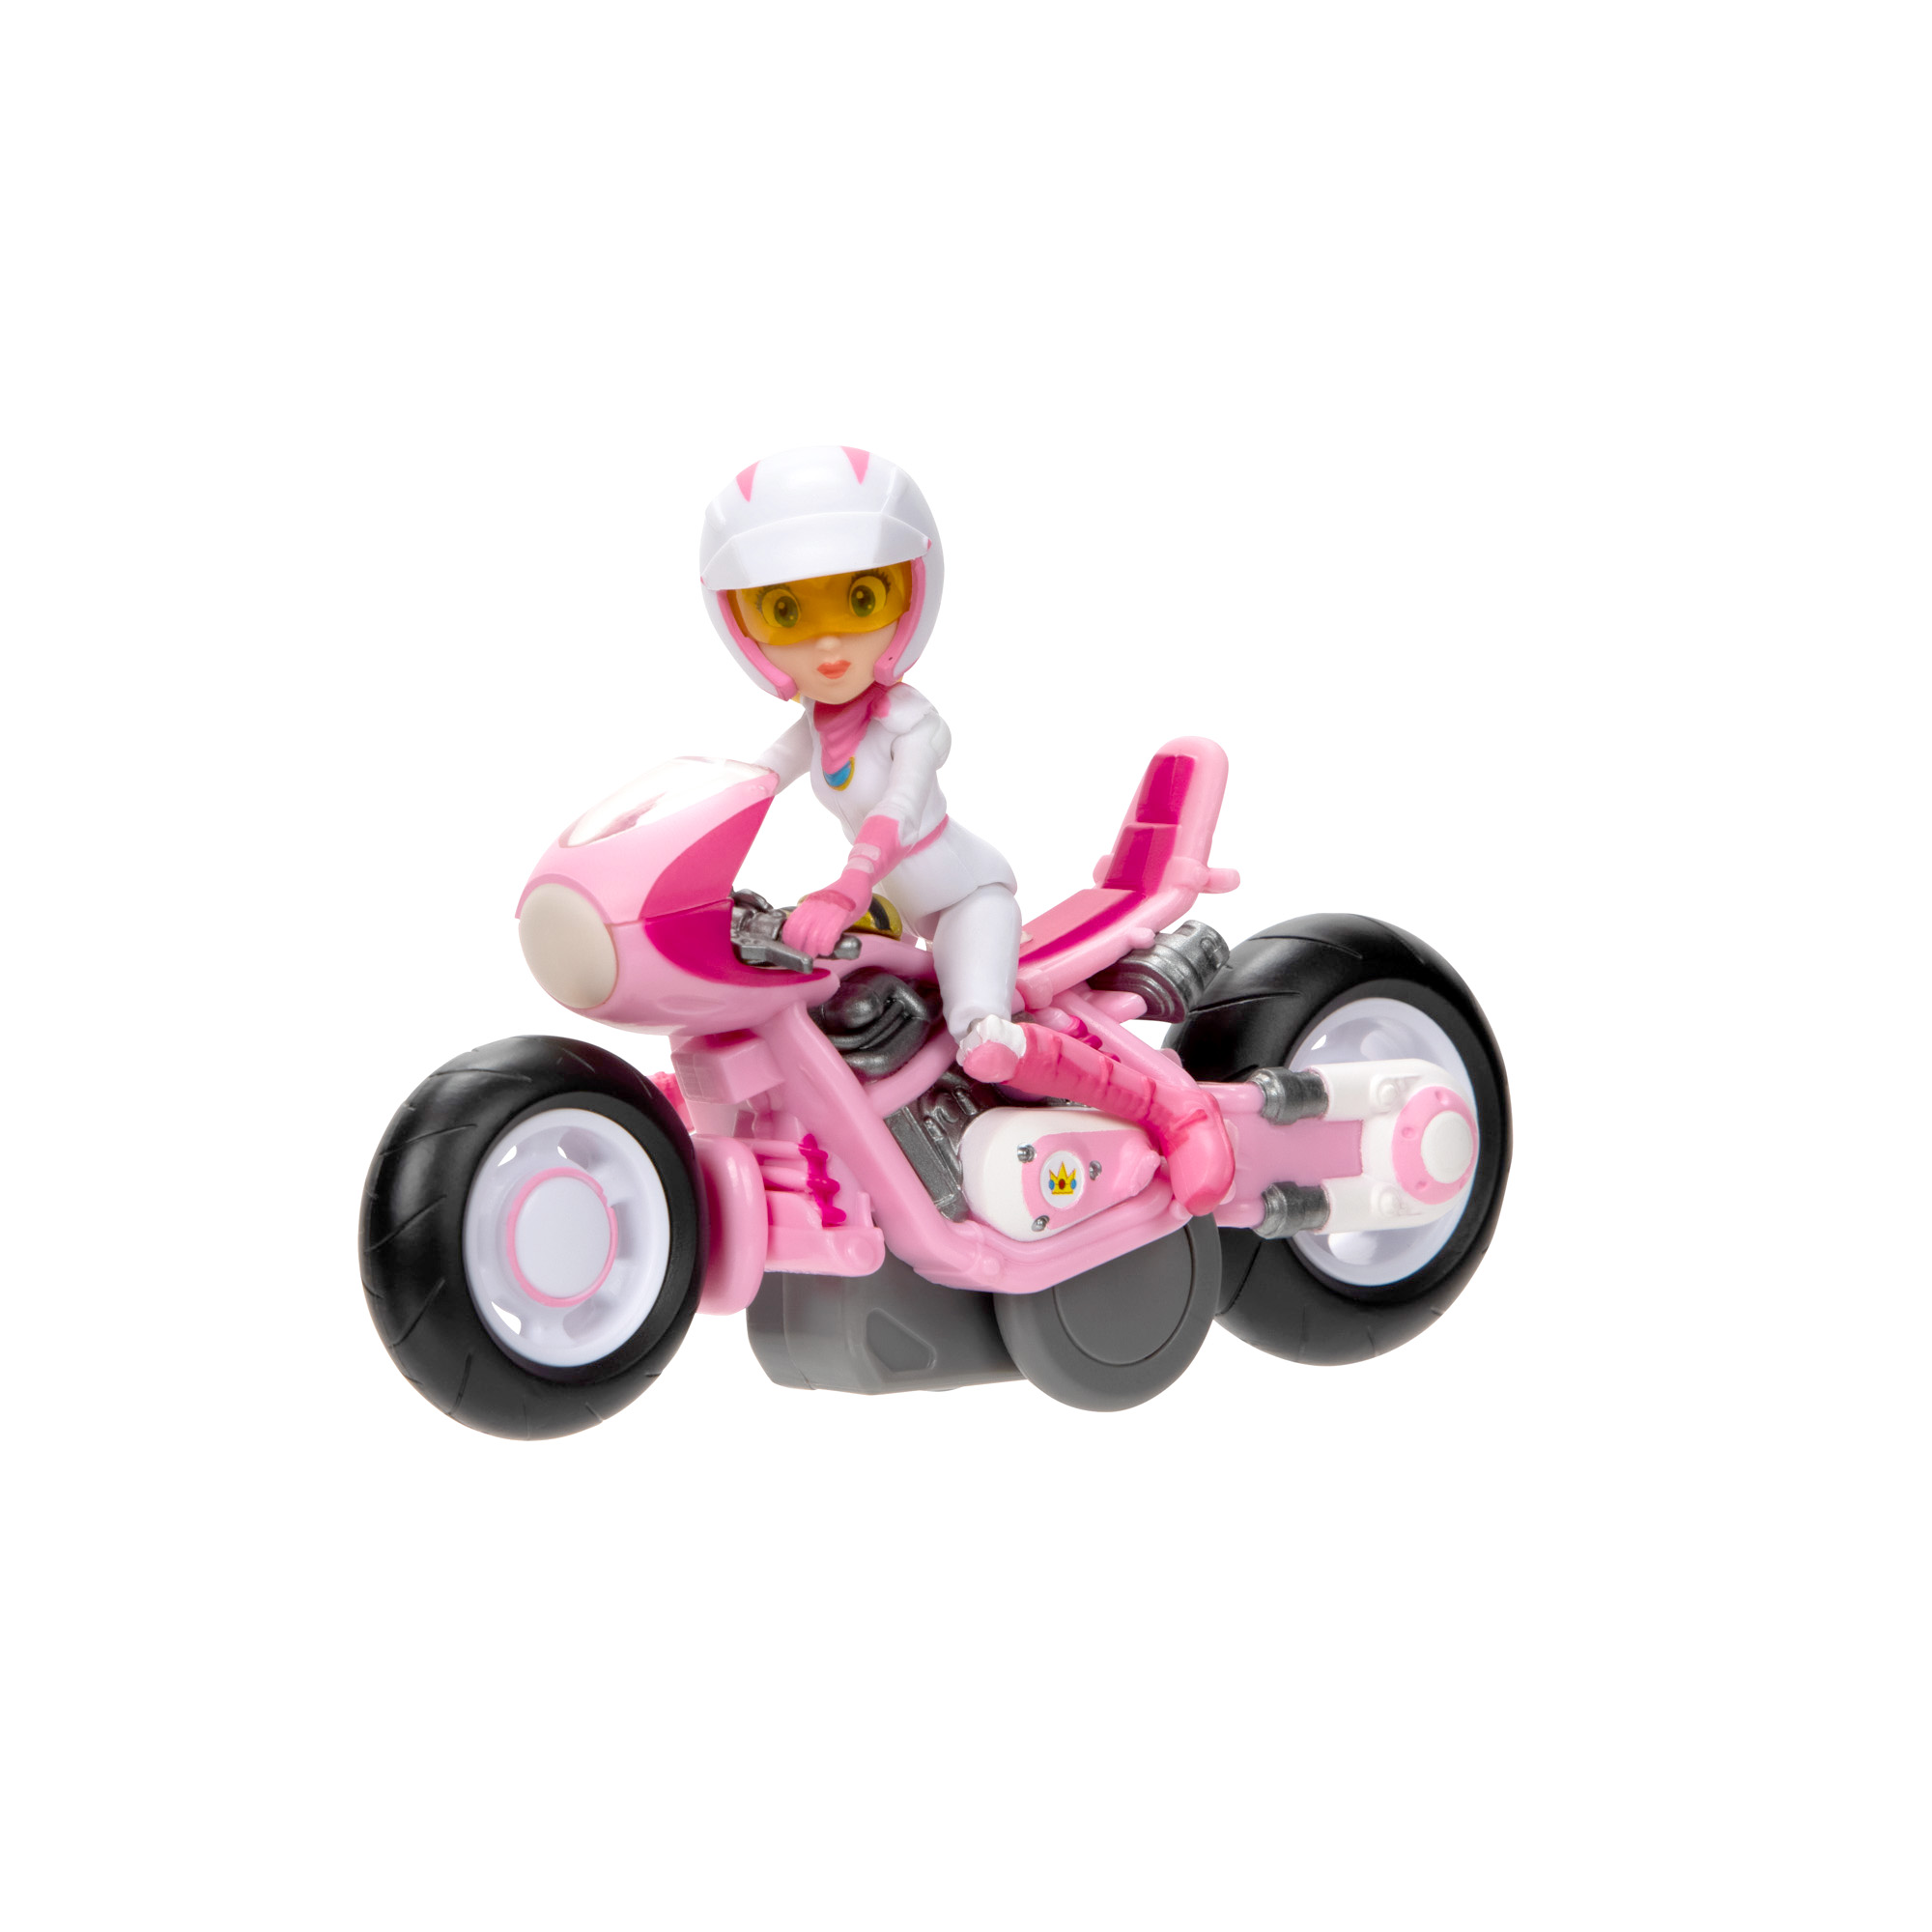 2.5” Peach Figure with Pull Back Racer